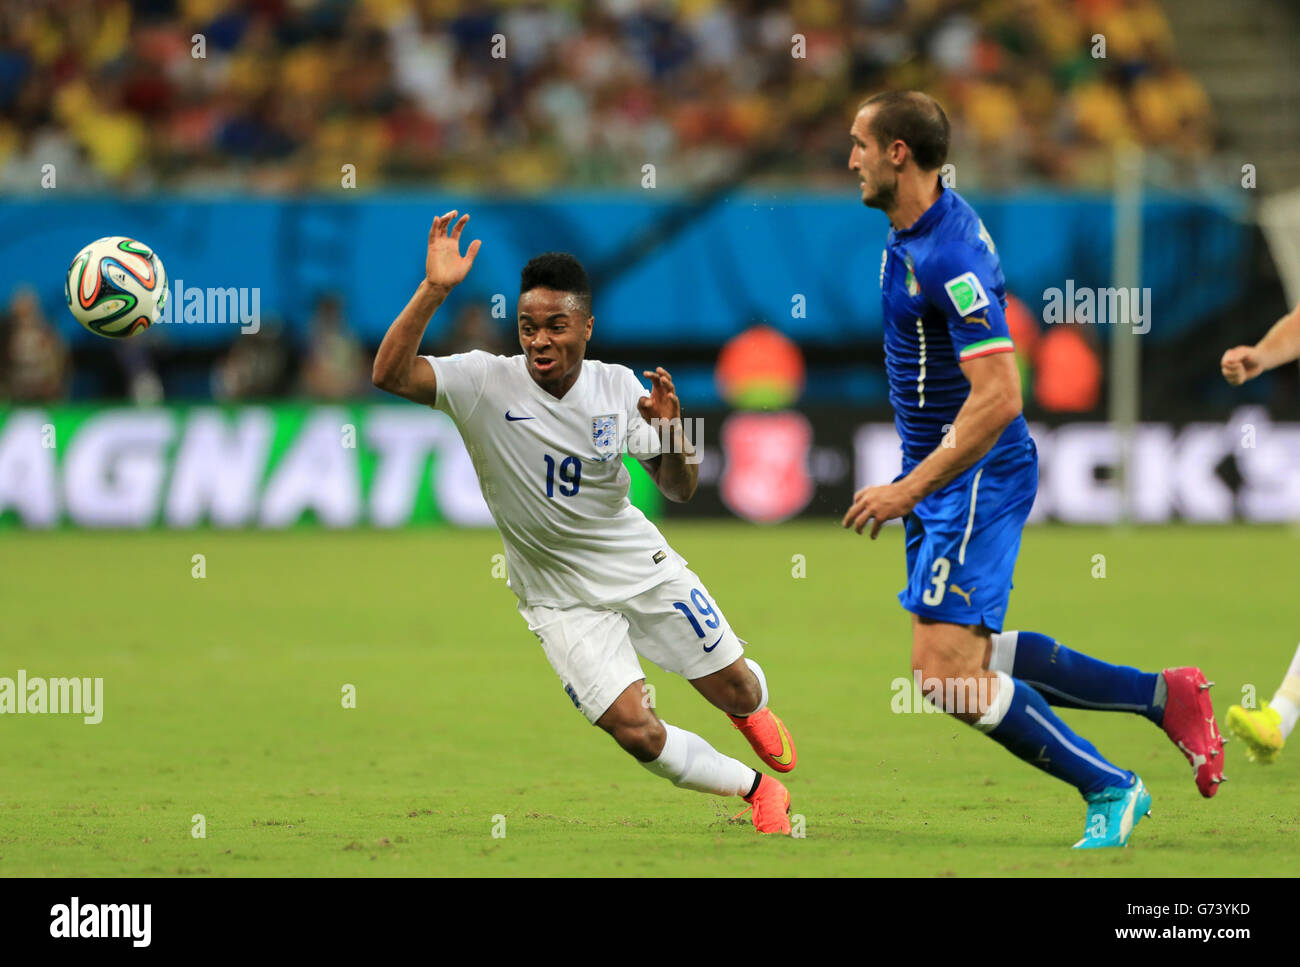 England's Raheem Sterling (left) and Italy's Giorgio Chiellini (right) battle for the ball during the FIFA World Cup, Group D match at the Arena da Amazonia, Manaus, Brazil. Stock Photo